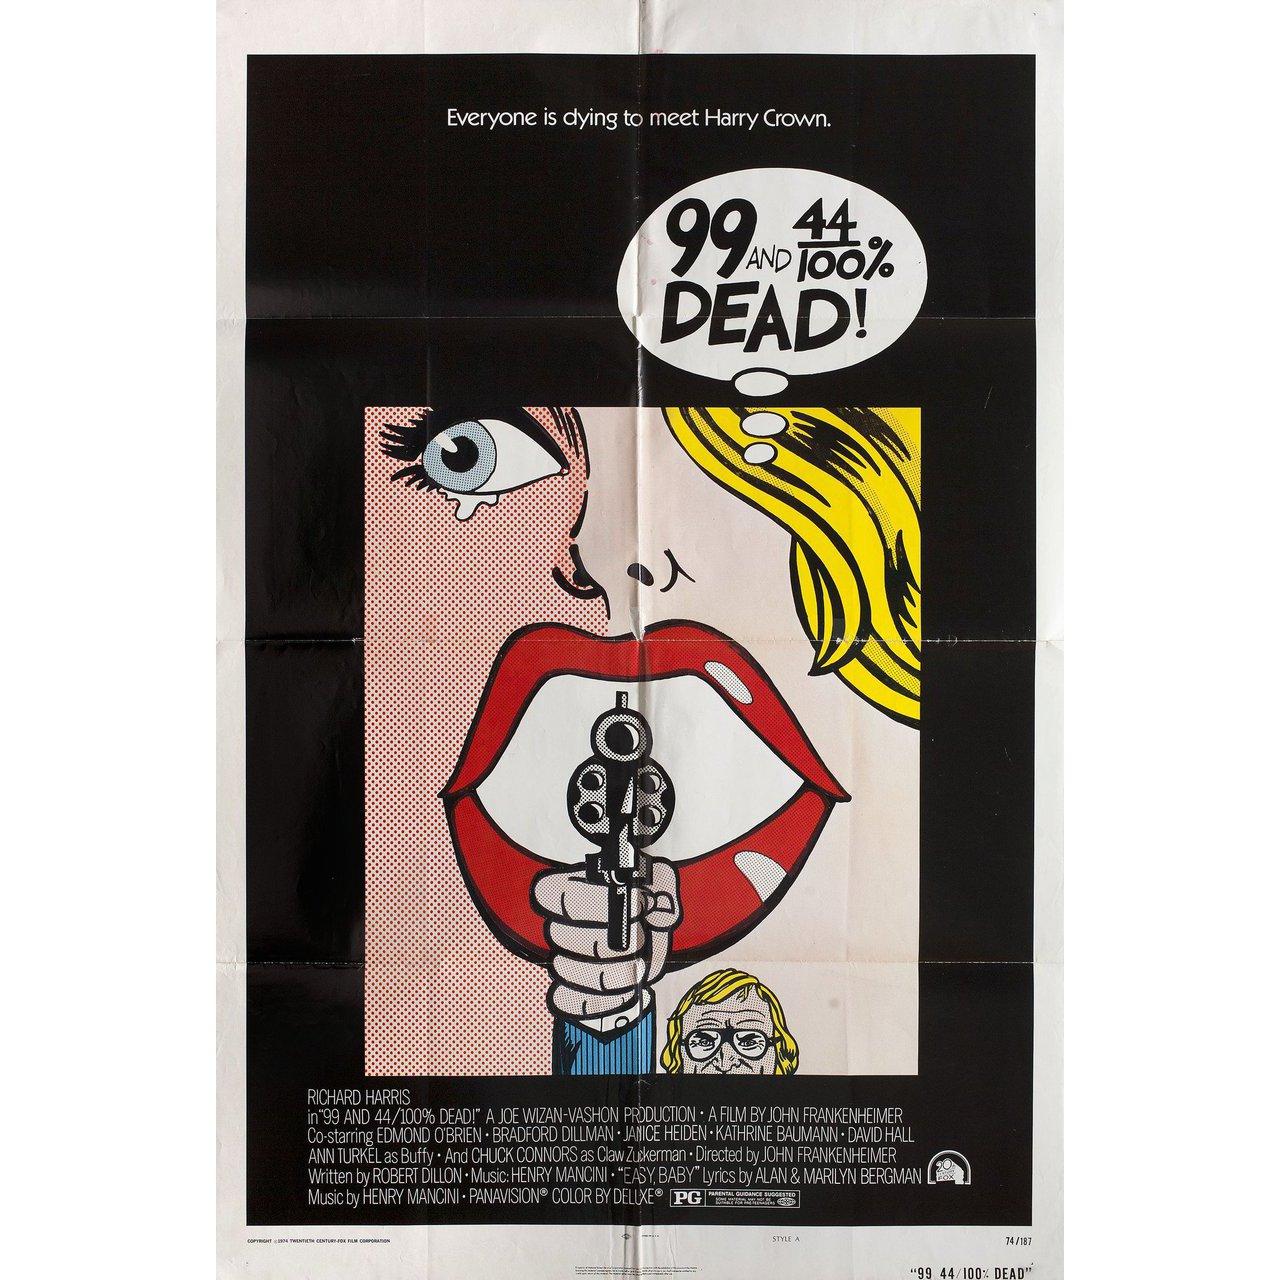 Original 1974 U.S. one sheet poster by Bill Gold for. Very good condition, folded. Many original posters were issued folded or were subsequently folded. Please note: the size is stated in inches and the actual size can vary by an inch or more.
  